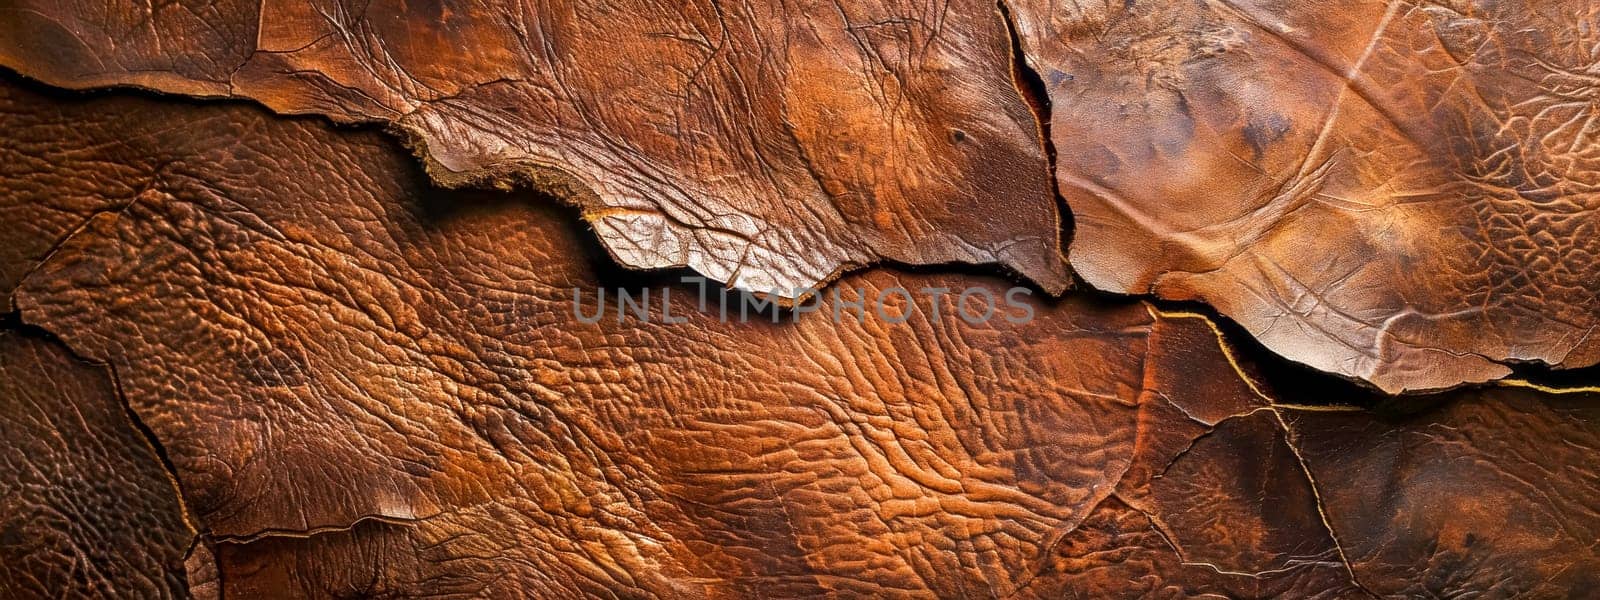 Close-up view of weathered. Aged. And cracked rustic leather texture background in brown color. Showcasing the organic and durable material with traditional craftsmanship. Earthy luxury